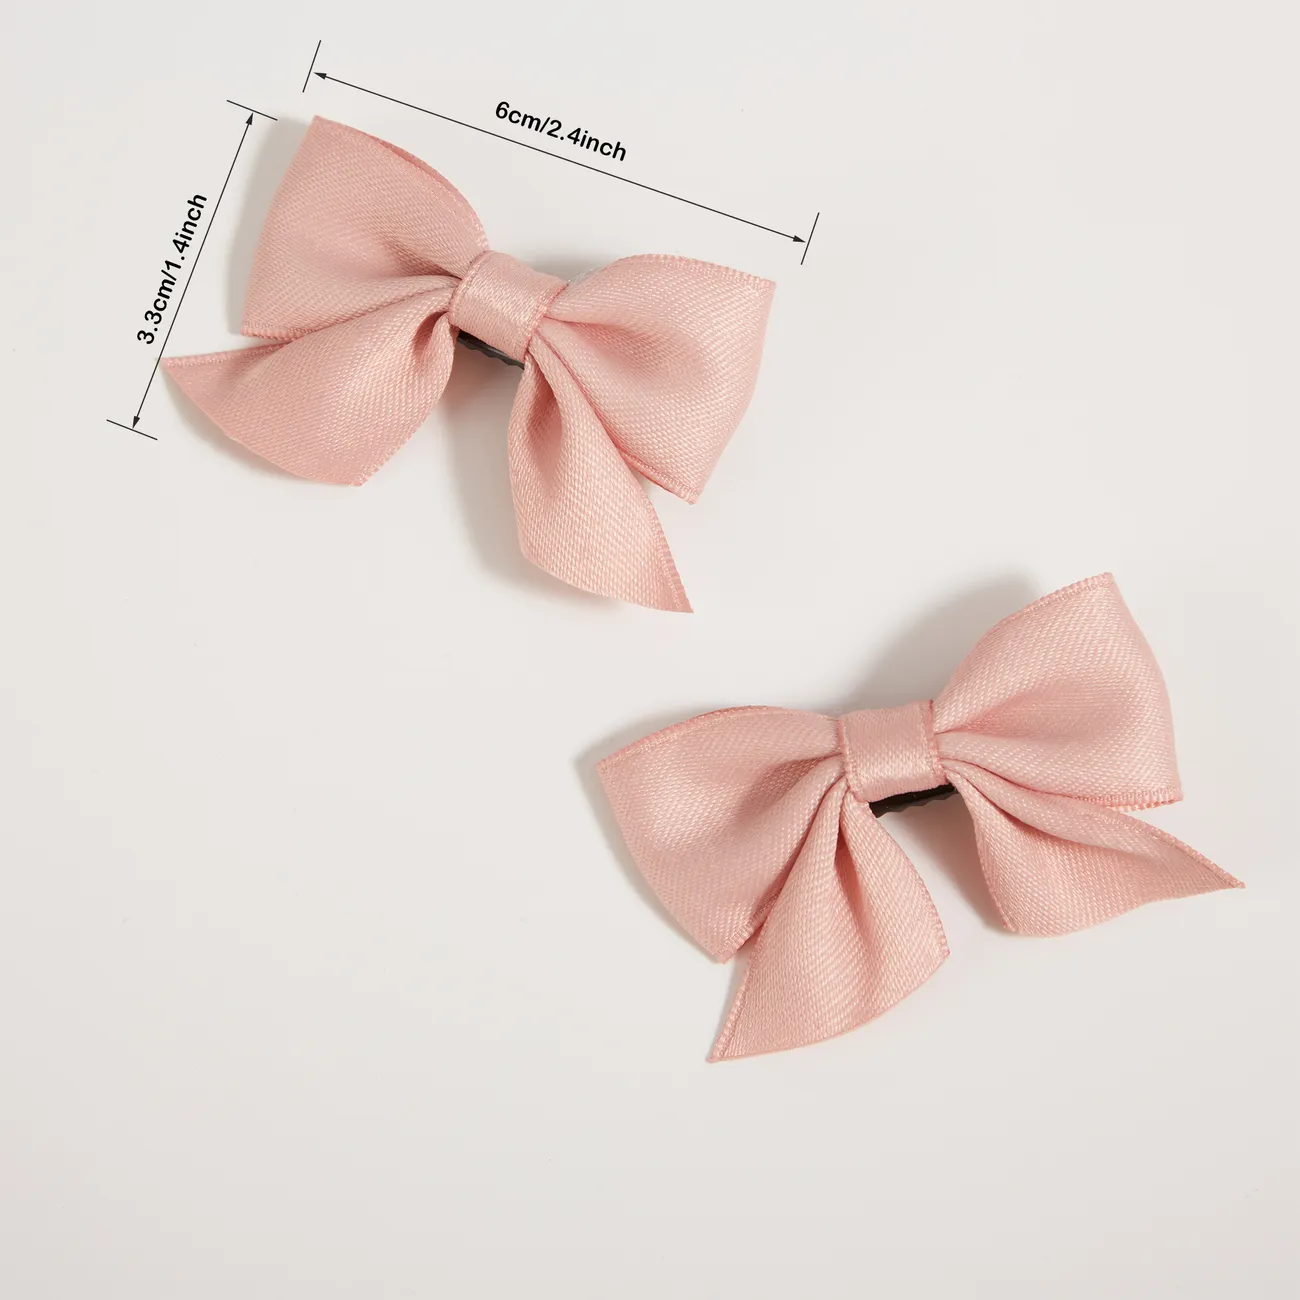 2-piece Solid Bowknot Hairband for Girls Pink big image 1